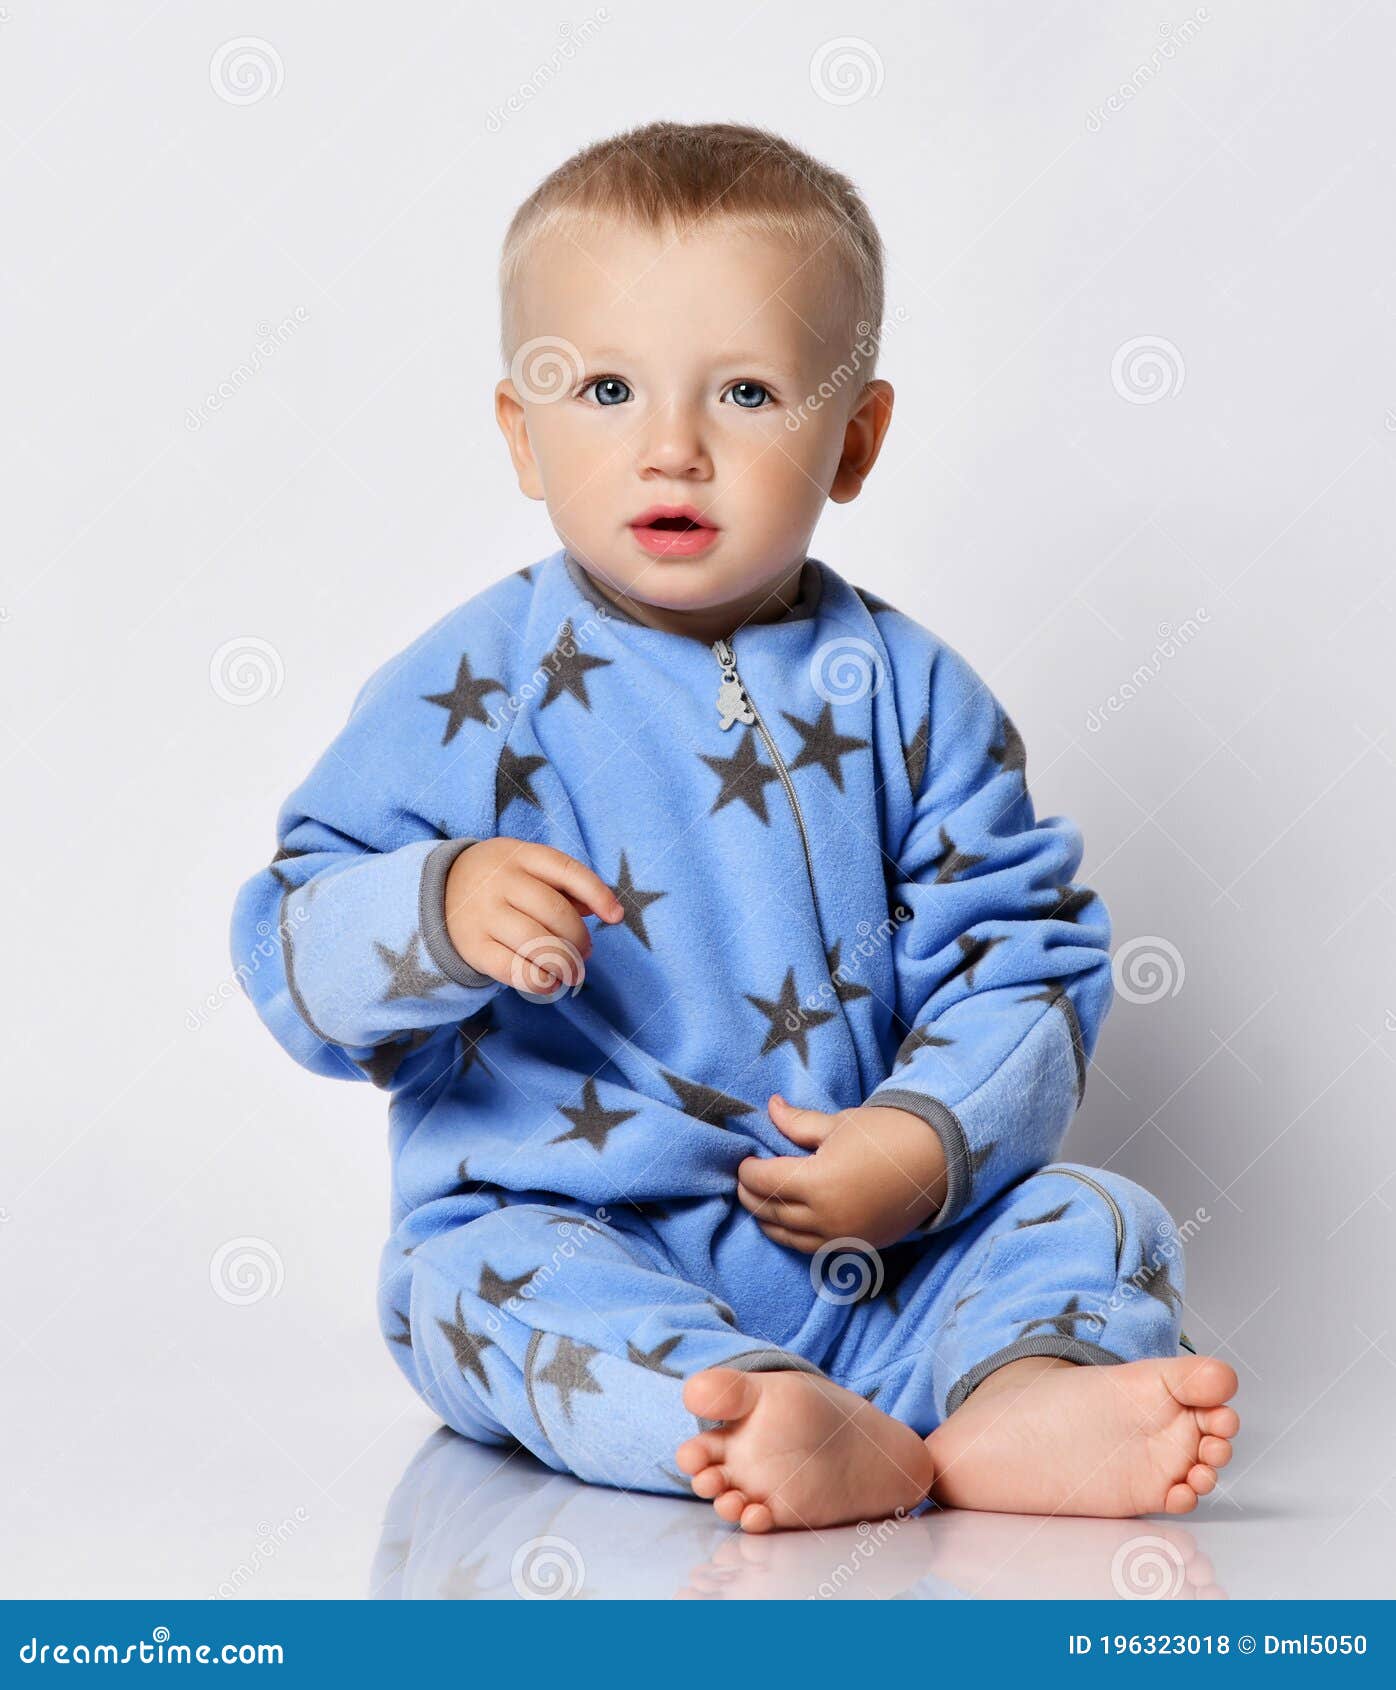 Buy CABINAHOME Newborn Baby Fleece Romper One-Piece Footies Jumpsuit Pajama  Infant Onesies for Baby Boys Girls White at Amazon.in